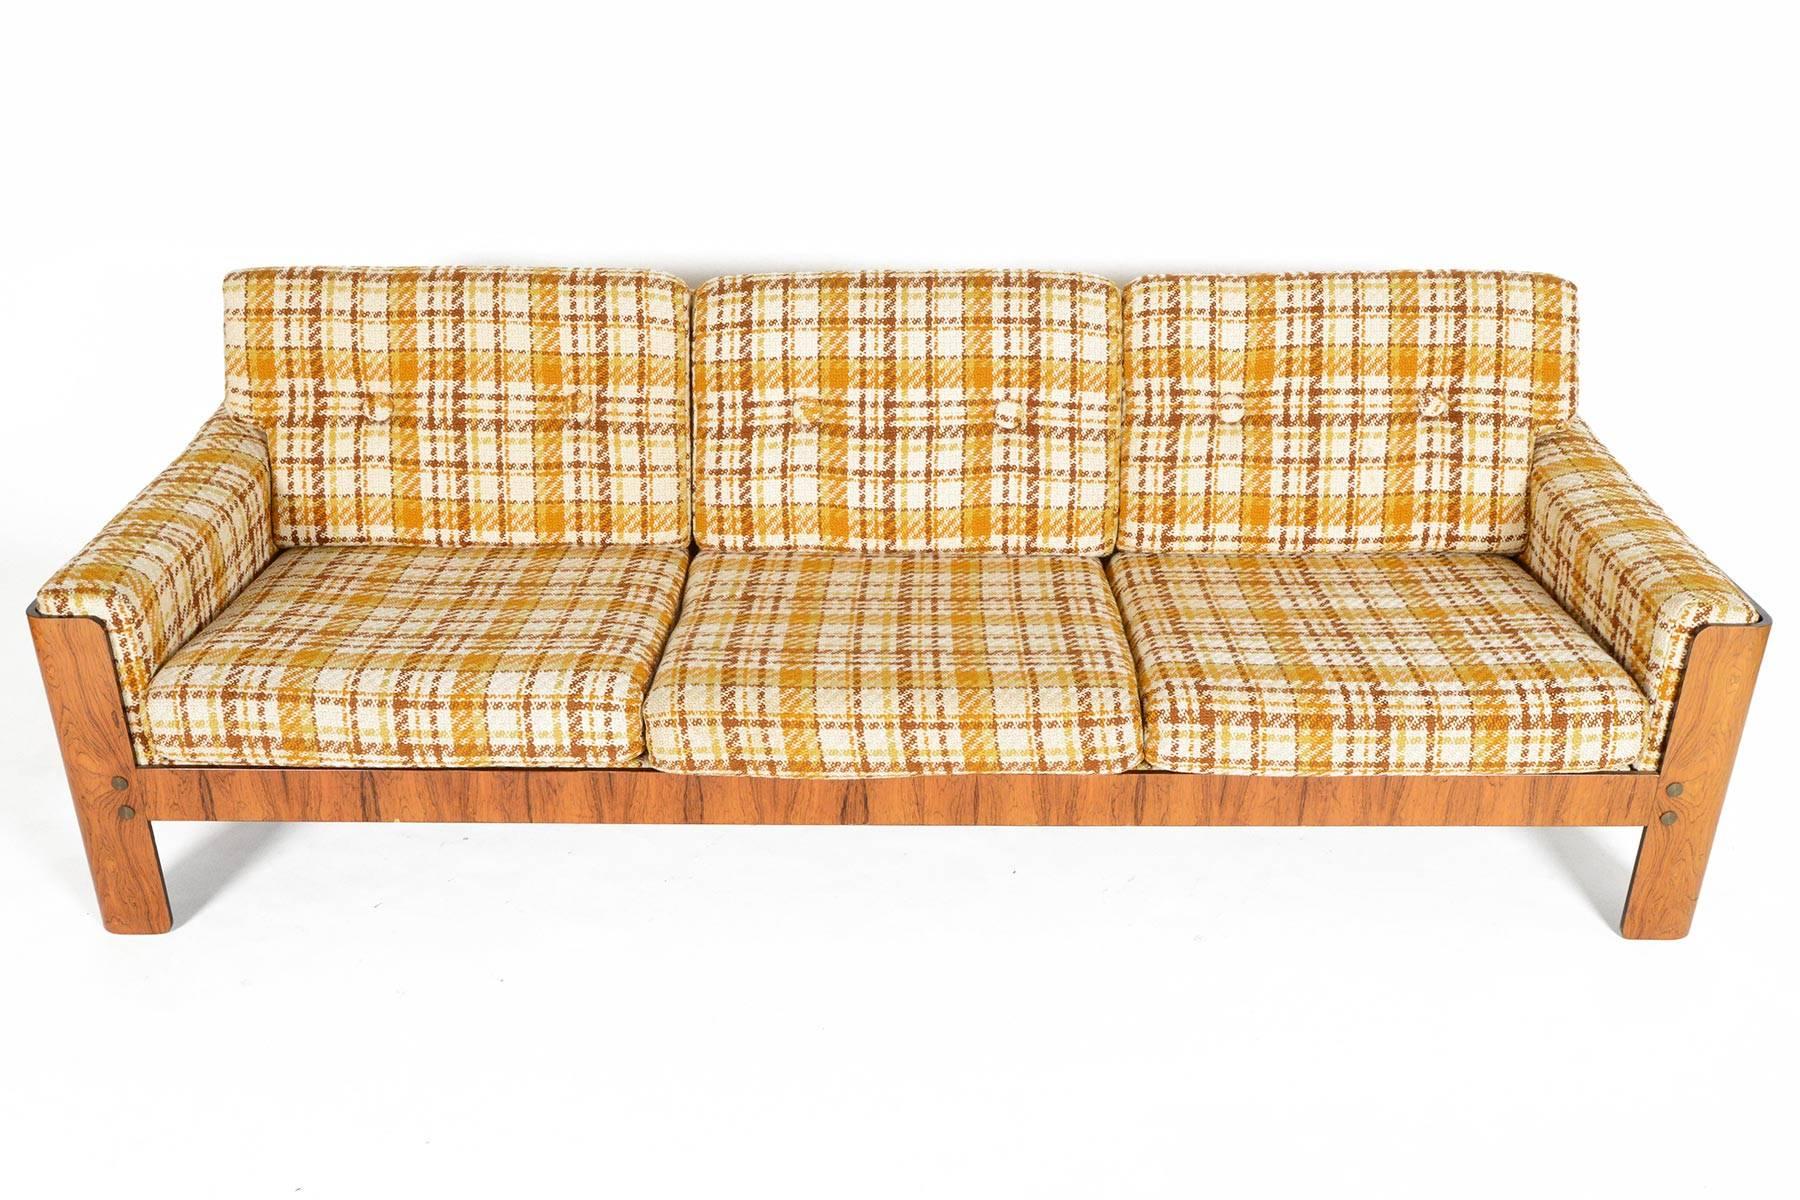 This Danish modern midcentury three-seat sofa hails from the early 1970s and is an exceptional find. The perfectly patinated rosewood frame holds the eight removable cushions and upholstered back. Brass hardware adds a finishing touch. This sofa